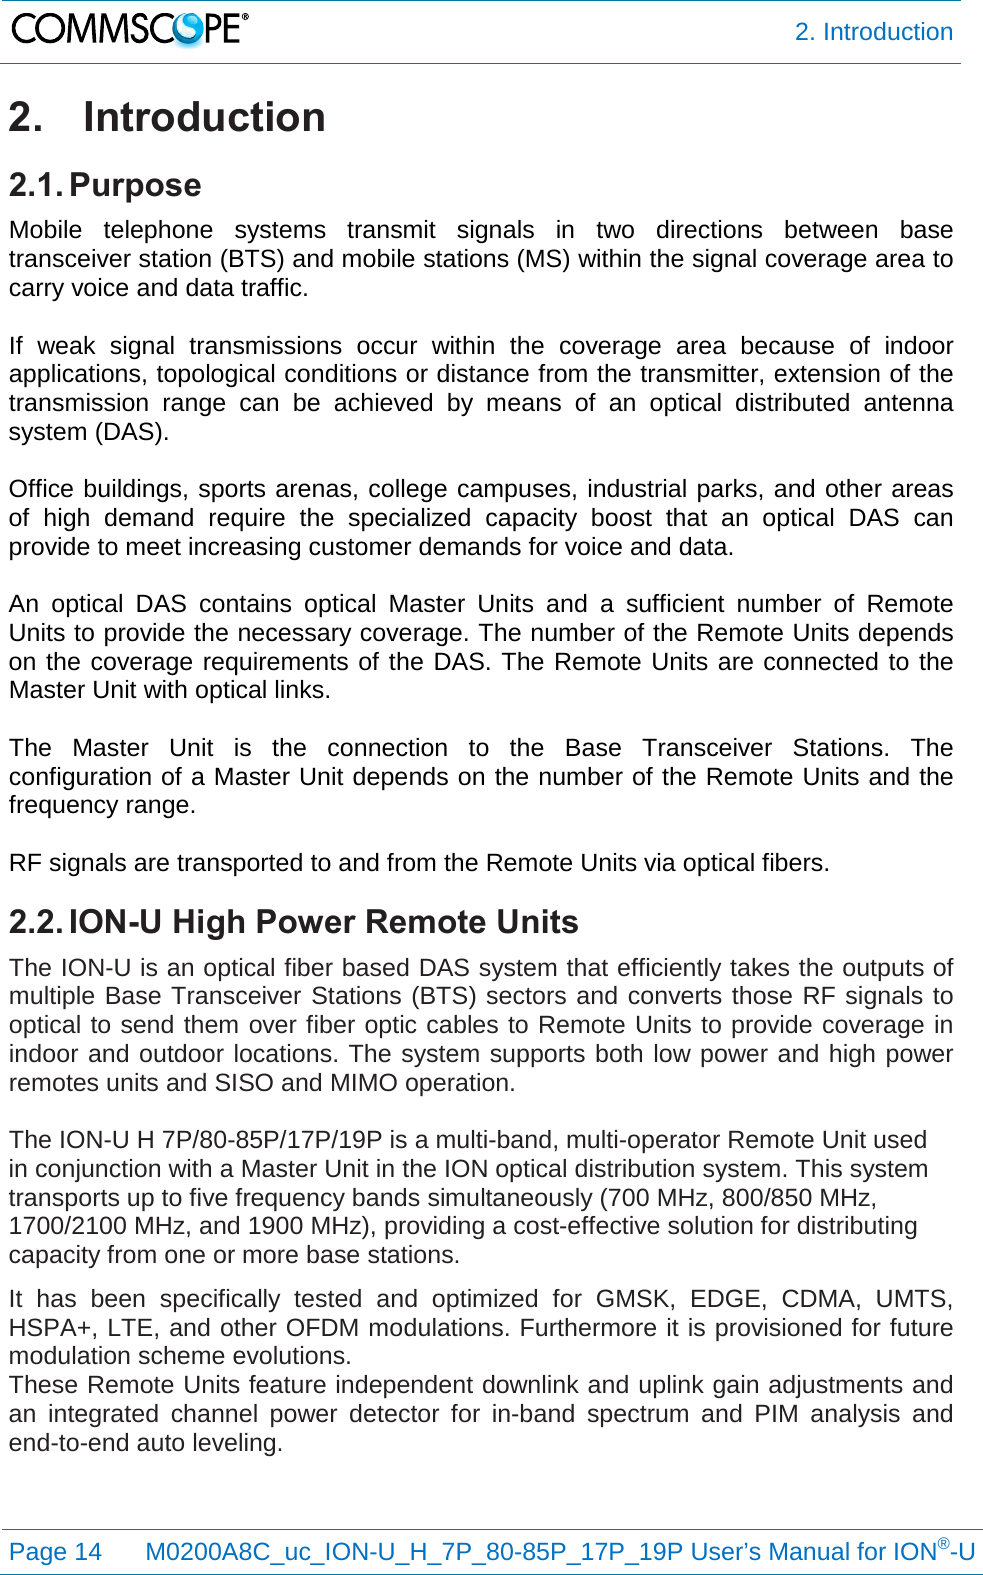  2. Introduction  Page 14 M0200A8C_uc_ION-U_H_7P_80-85P_17P_19P User’s Manual for ION®-U  2.  Introduction 2.1. Purpose Mobile telephone systems transmit signals in two directions between base transceiver station (BTS) and mobile stations (MS) within the signal coverage area to carry voice and data traffic.  If weak signal transmissions occur within the coverage area because of indoor applications, topological conditions or distance from the transmitter, extension of the transmission range can be achieved by means of an optical distributed antenna system (DAS).  Office buildings, sports arenas, college campuses, industrial parks, and other areas of high demand require the specialized capacity boost that an optical DAS can provide to meet increasing customer demands for voice and data.  An optical DAS contains optical Master Units  and  a sufficient number of Remote Units to provide the necessary coverage. The number of the Remote Units depends on the coverage requirements of the DAS. The Remote Units are connected to the Master Unit with optical links.  The Master Unit is the connection to the Base  Transceiver  Stations. The configuration of a Master Unit depends on the number of the Remote Units and the frequency range.  RF signals are transported to and from the Remote Units via optical fibers.  2.2. ION-U High Power Remote Units The ION-U is an optical fiber based DAS system that efficiently takes the outputs of multiple Base Transceiver Stations (BTS) sectors and converts those RF signals to optical to send them over fiber optic cables to Remote Units to provide coverage in indoor and outdoor locations. The system supports both low power and high power remotes units and SISO and MIMO operation.  The ION-U H 7P/80-85P/17P/19P is a multi-band, multi-operator Remote Unit used in conjunction with a Master Unit in the ION optical distribution system. This system transports up to five frequency bands simultaneously (700 MHz, 800/850 MHz, 1700/2100 MHz, and 1900 MHz), providing a cost-effective solution for distributing capacity from one or more base stations. It has been specifically tested and optimized for GMSK, EDGE, CDMA,  UMTS, HSPA+, LTE, and other OFDM modulations. Furthermore it is provisioned for future modulation scheme evolutions. These Remote Units feature independent downlink and uplink gain adjustments and an integrated channel power detector for in-band spectrum and PIM analysis and end-to-end auto leveling.    